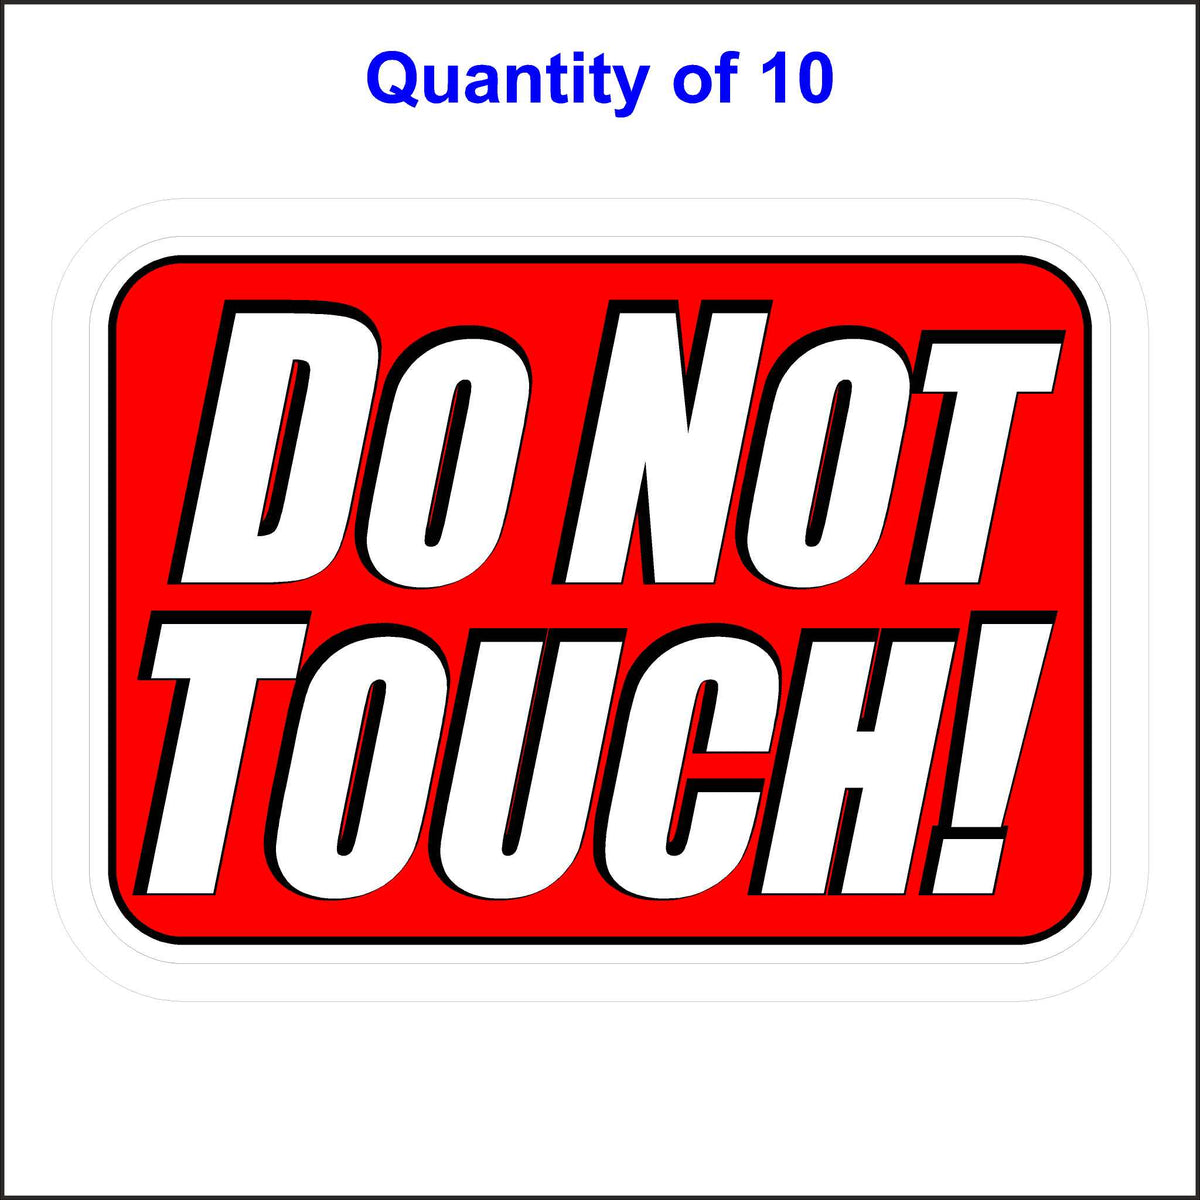 Do Not Touch Sticker With a Red Background and White Letters. 10 Quantity.